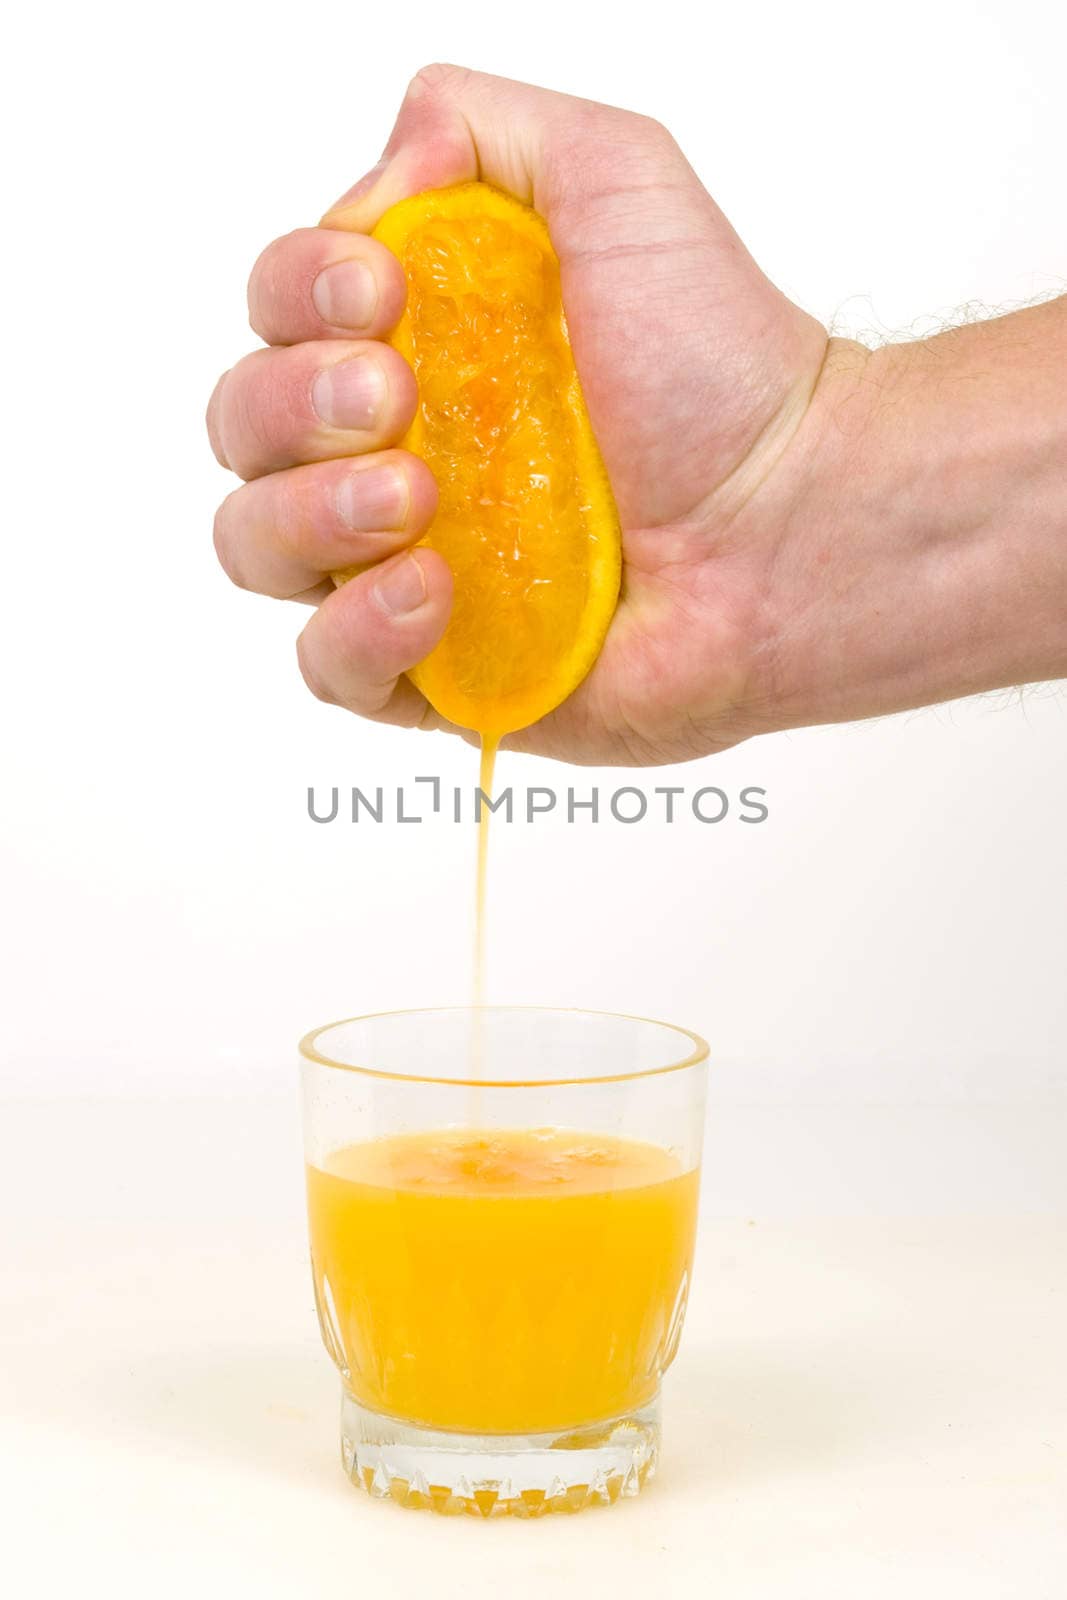 A male hand squeezes an orange into juice.